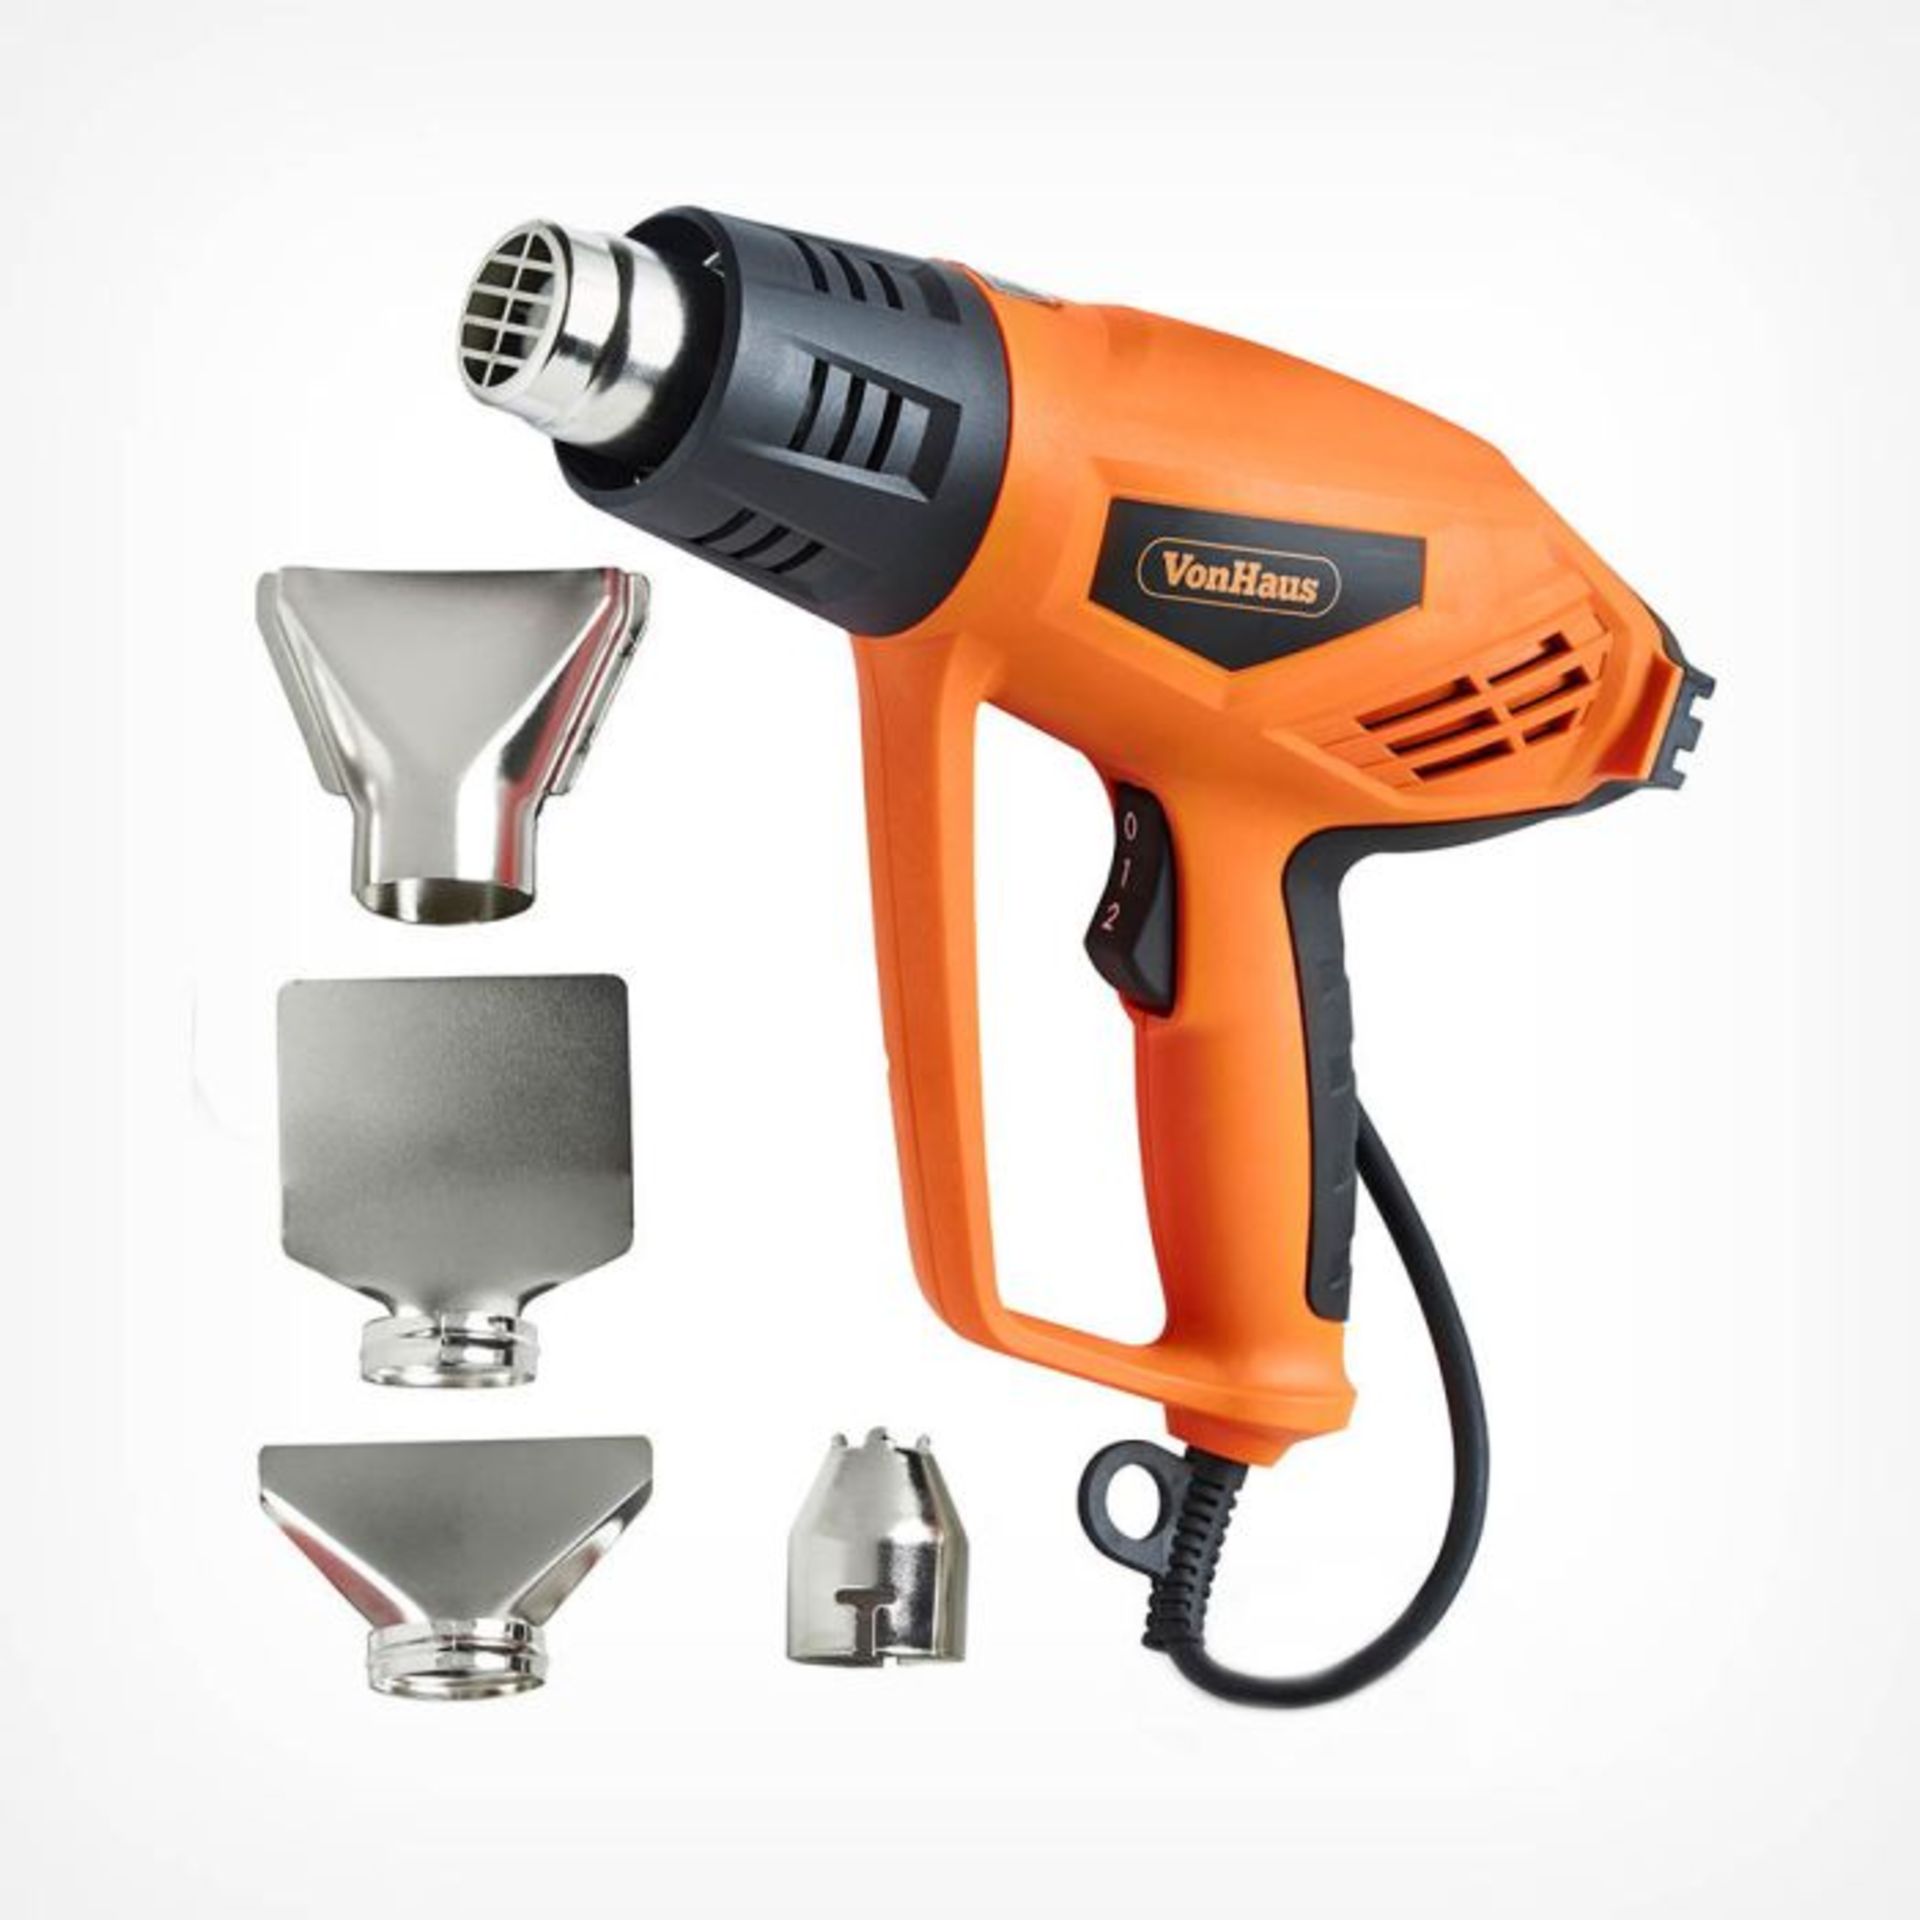 2000W Heat Gun. - PW. Features two easy-adjust operating temperatures, Min: 350°C and Max: 550°C for